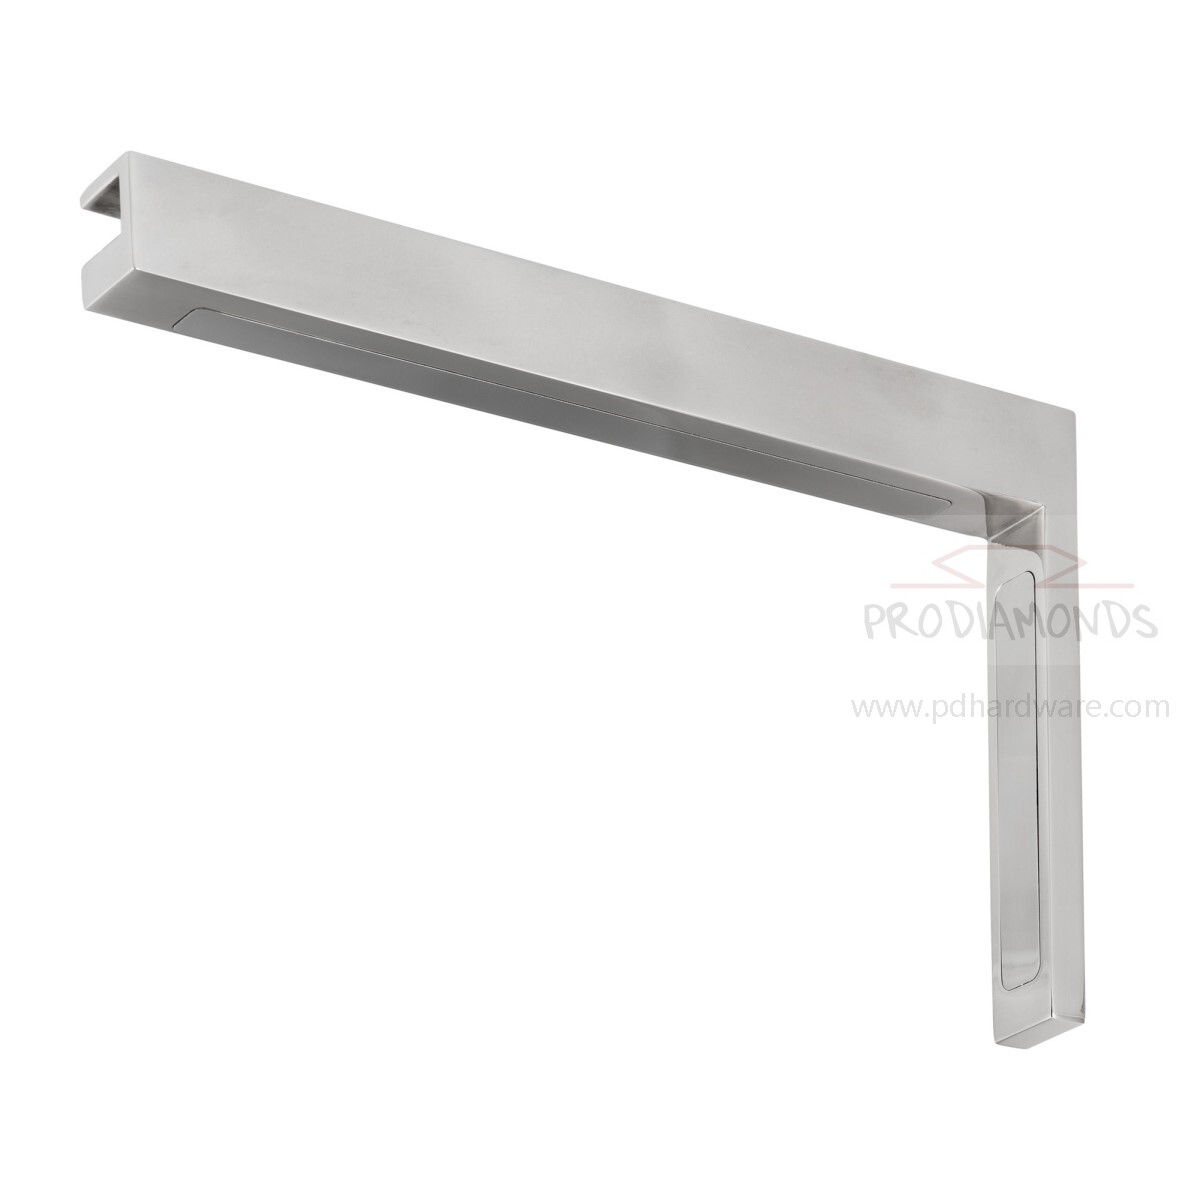 Stainless Steel 90-Degree Left Wall to Glass Shower Support Clamp with Covers